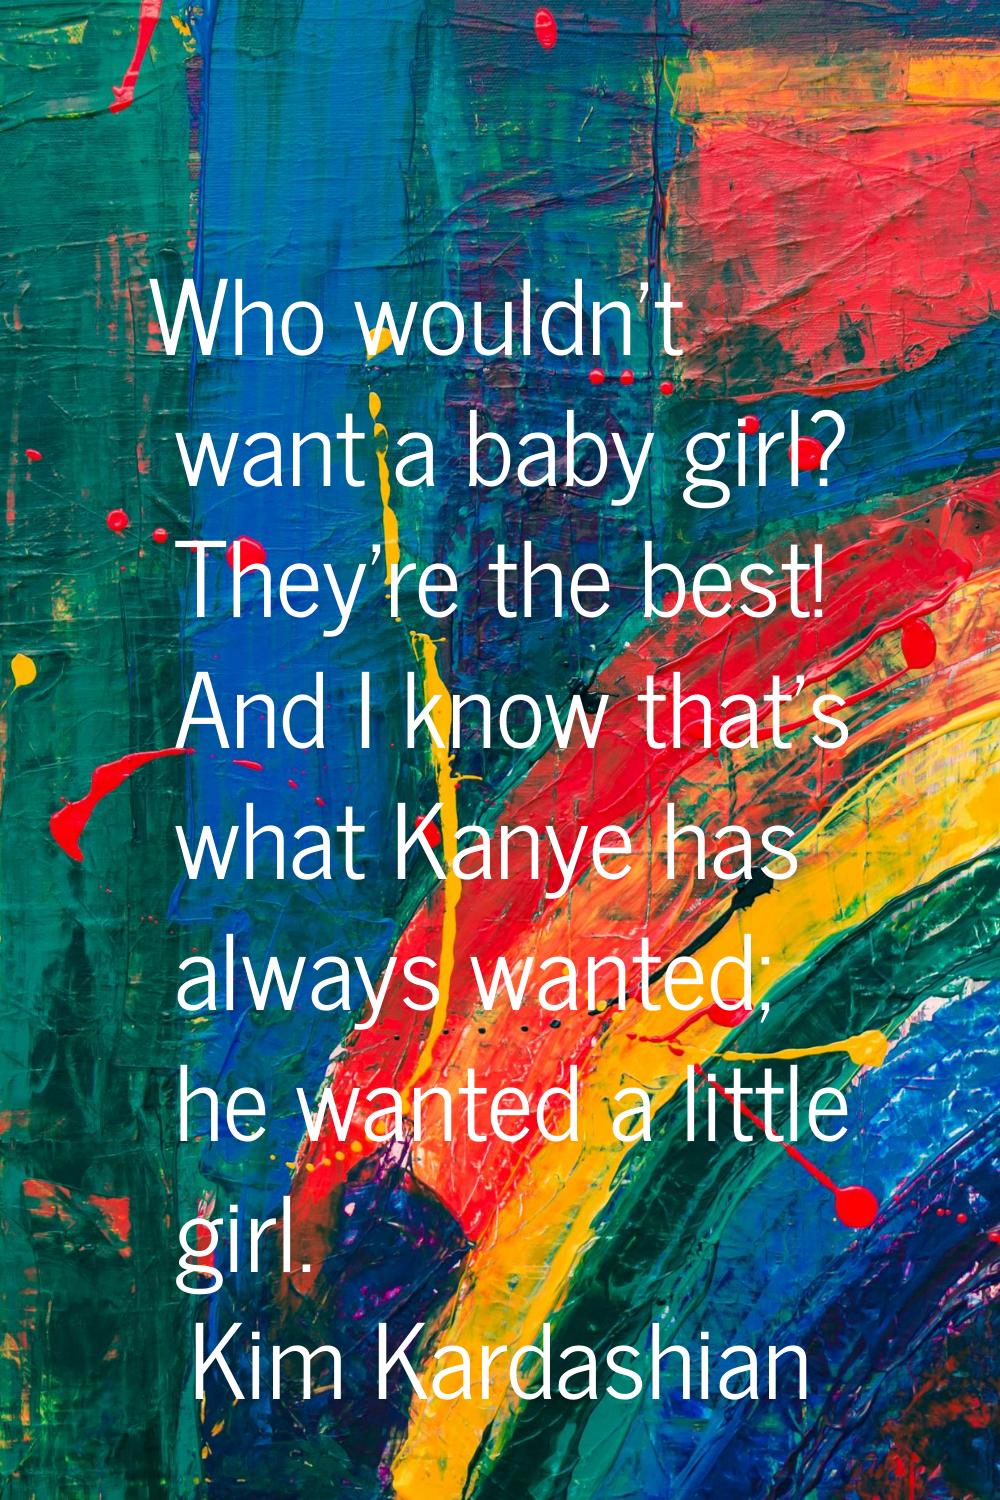 Who wouldn't want a baby girl? They're the best! And I know that's what Kanye has always wanted; he